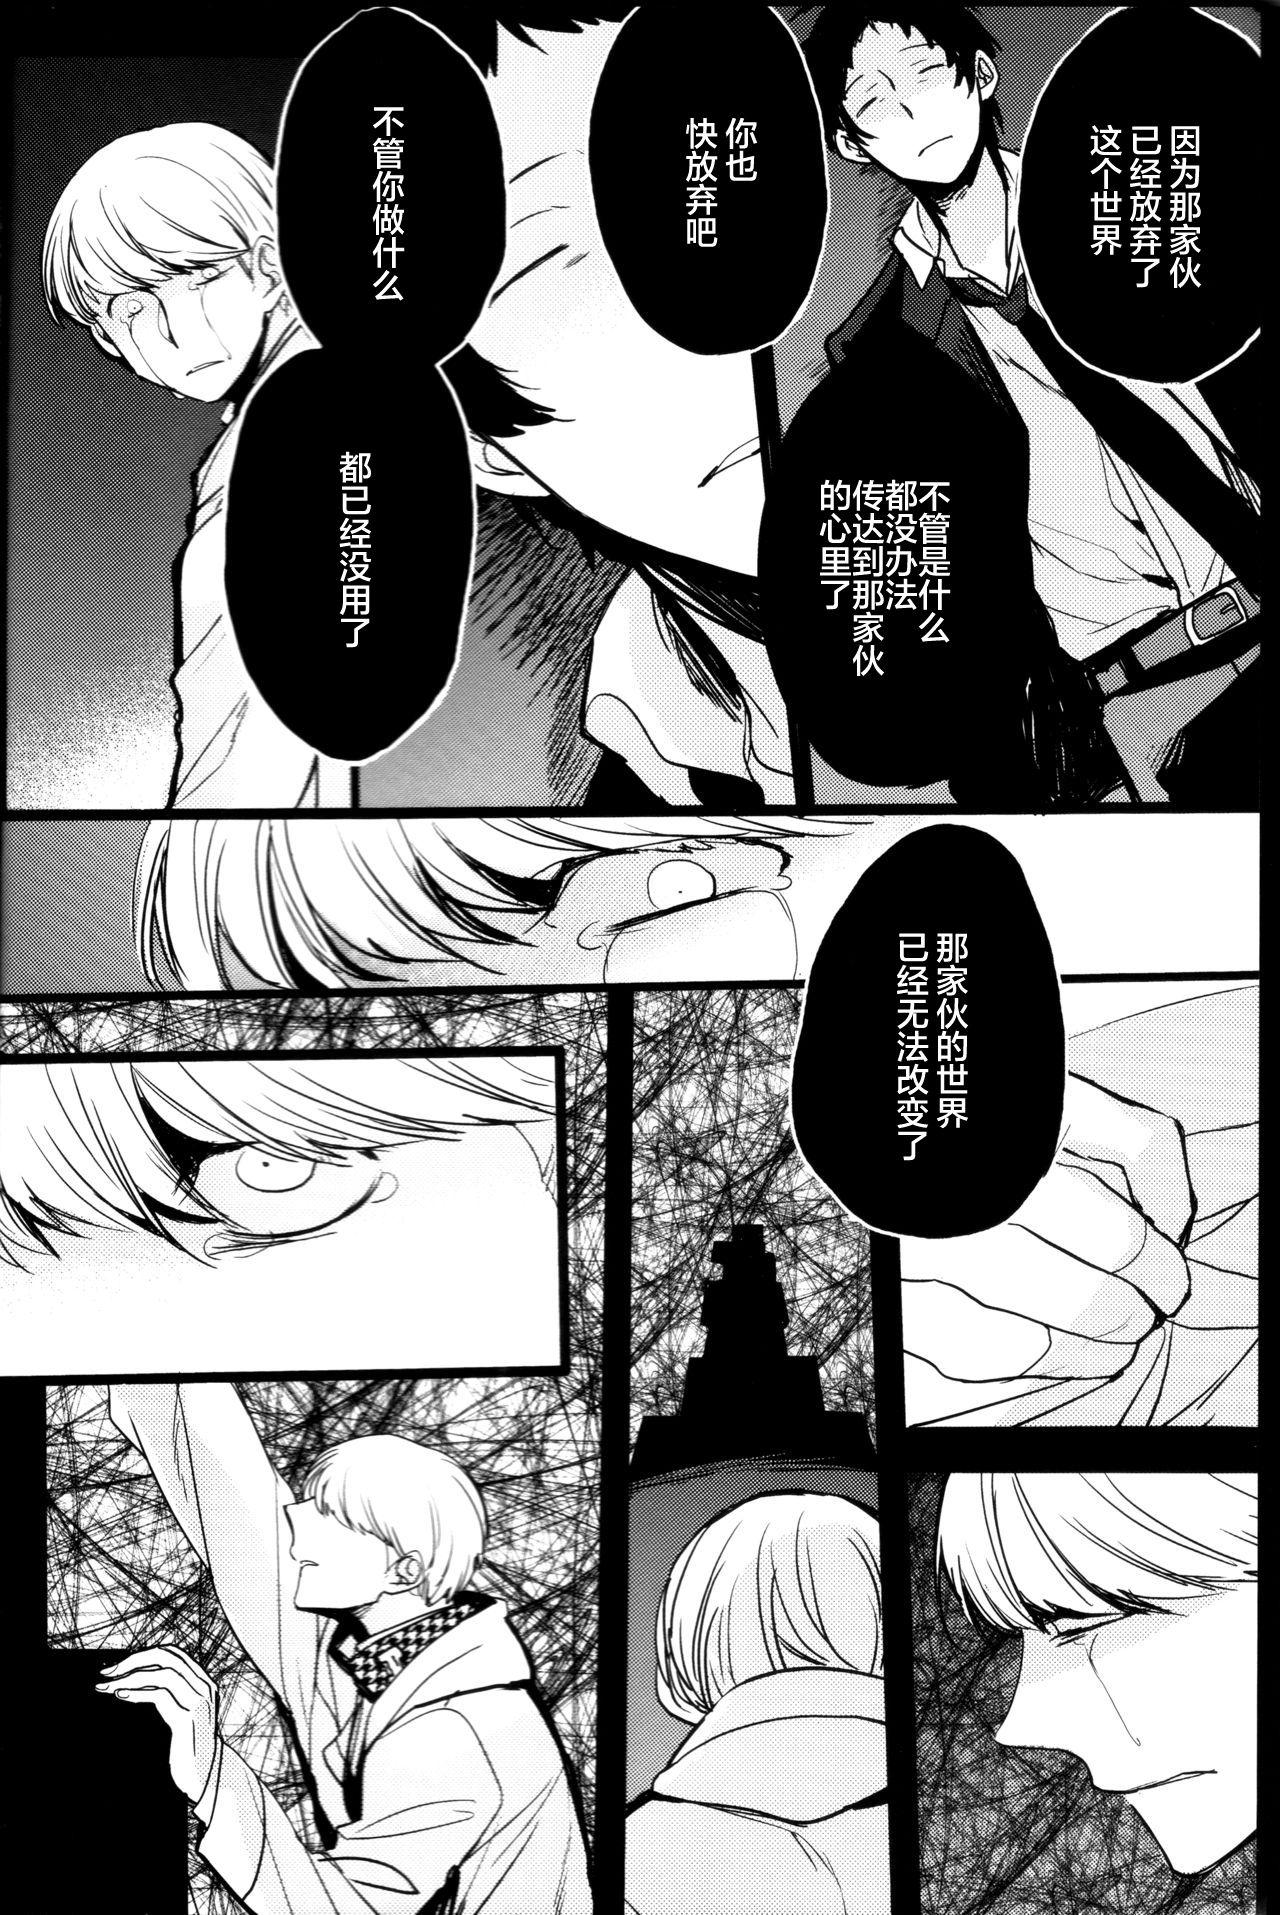 T Girl The End Of The World Volume 3 - Persona 4 Com - Page 8